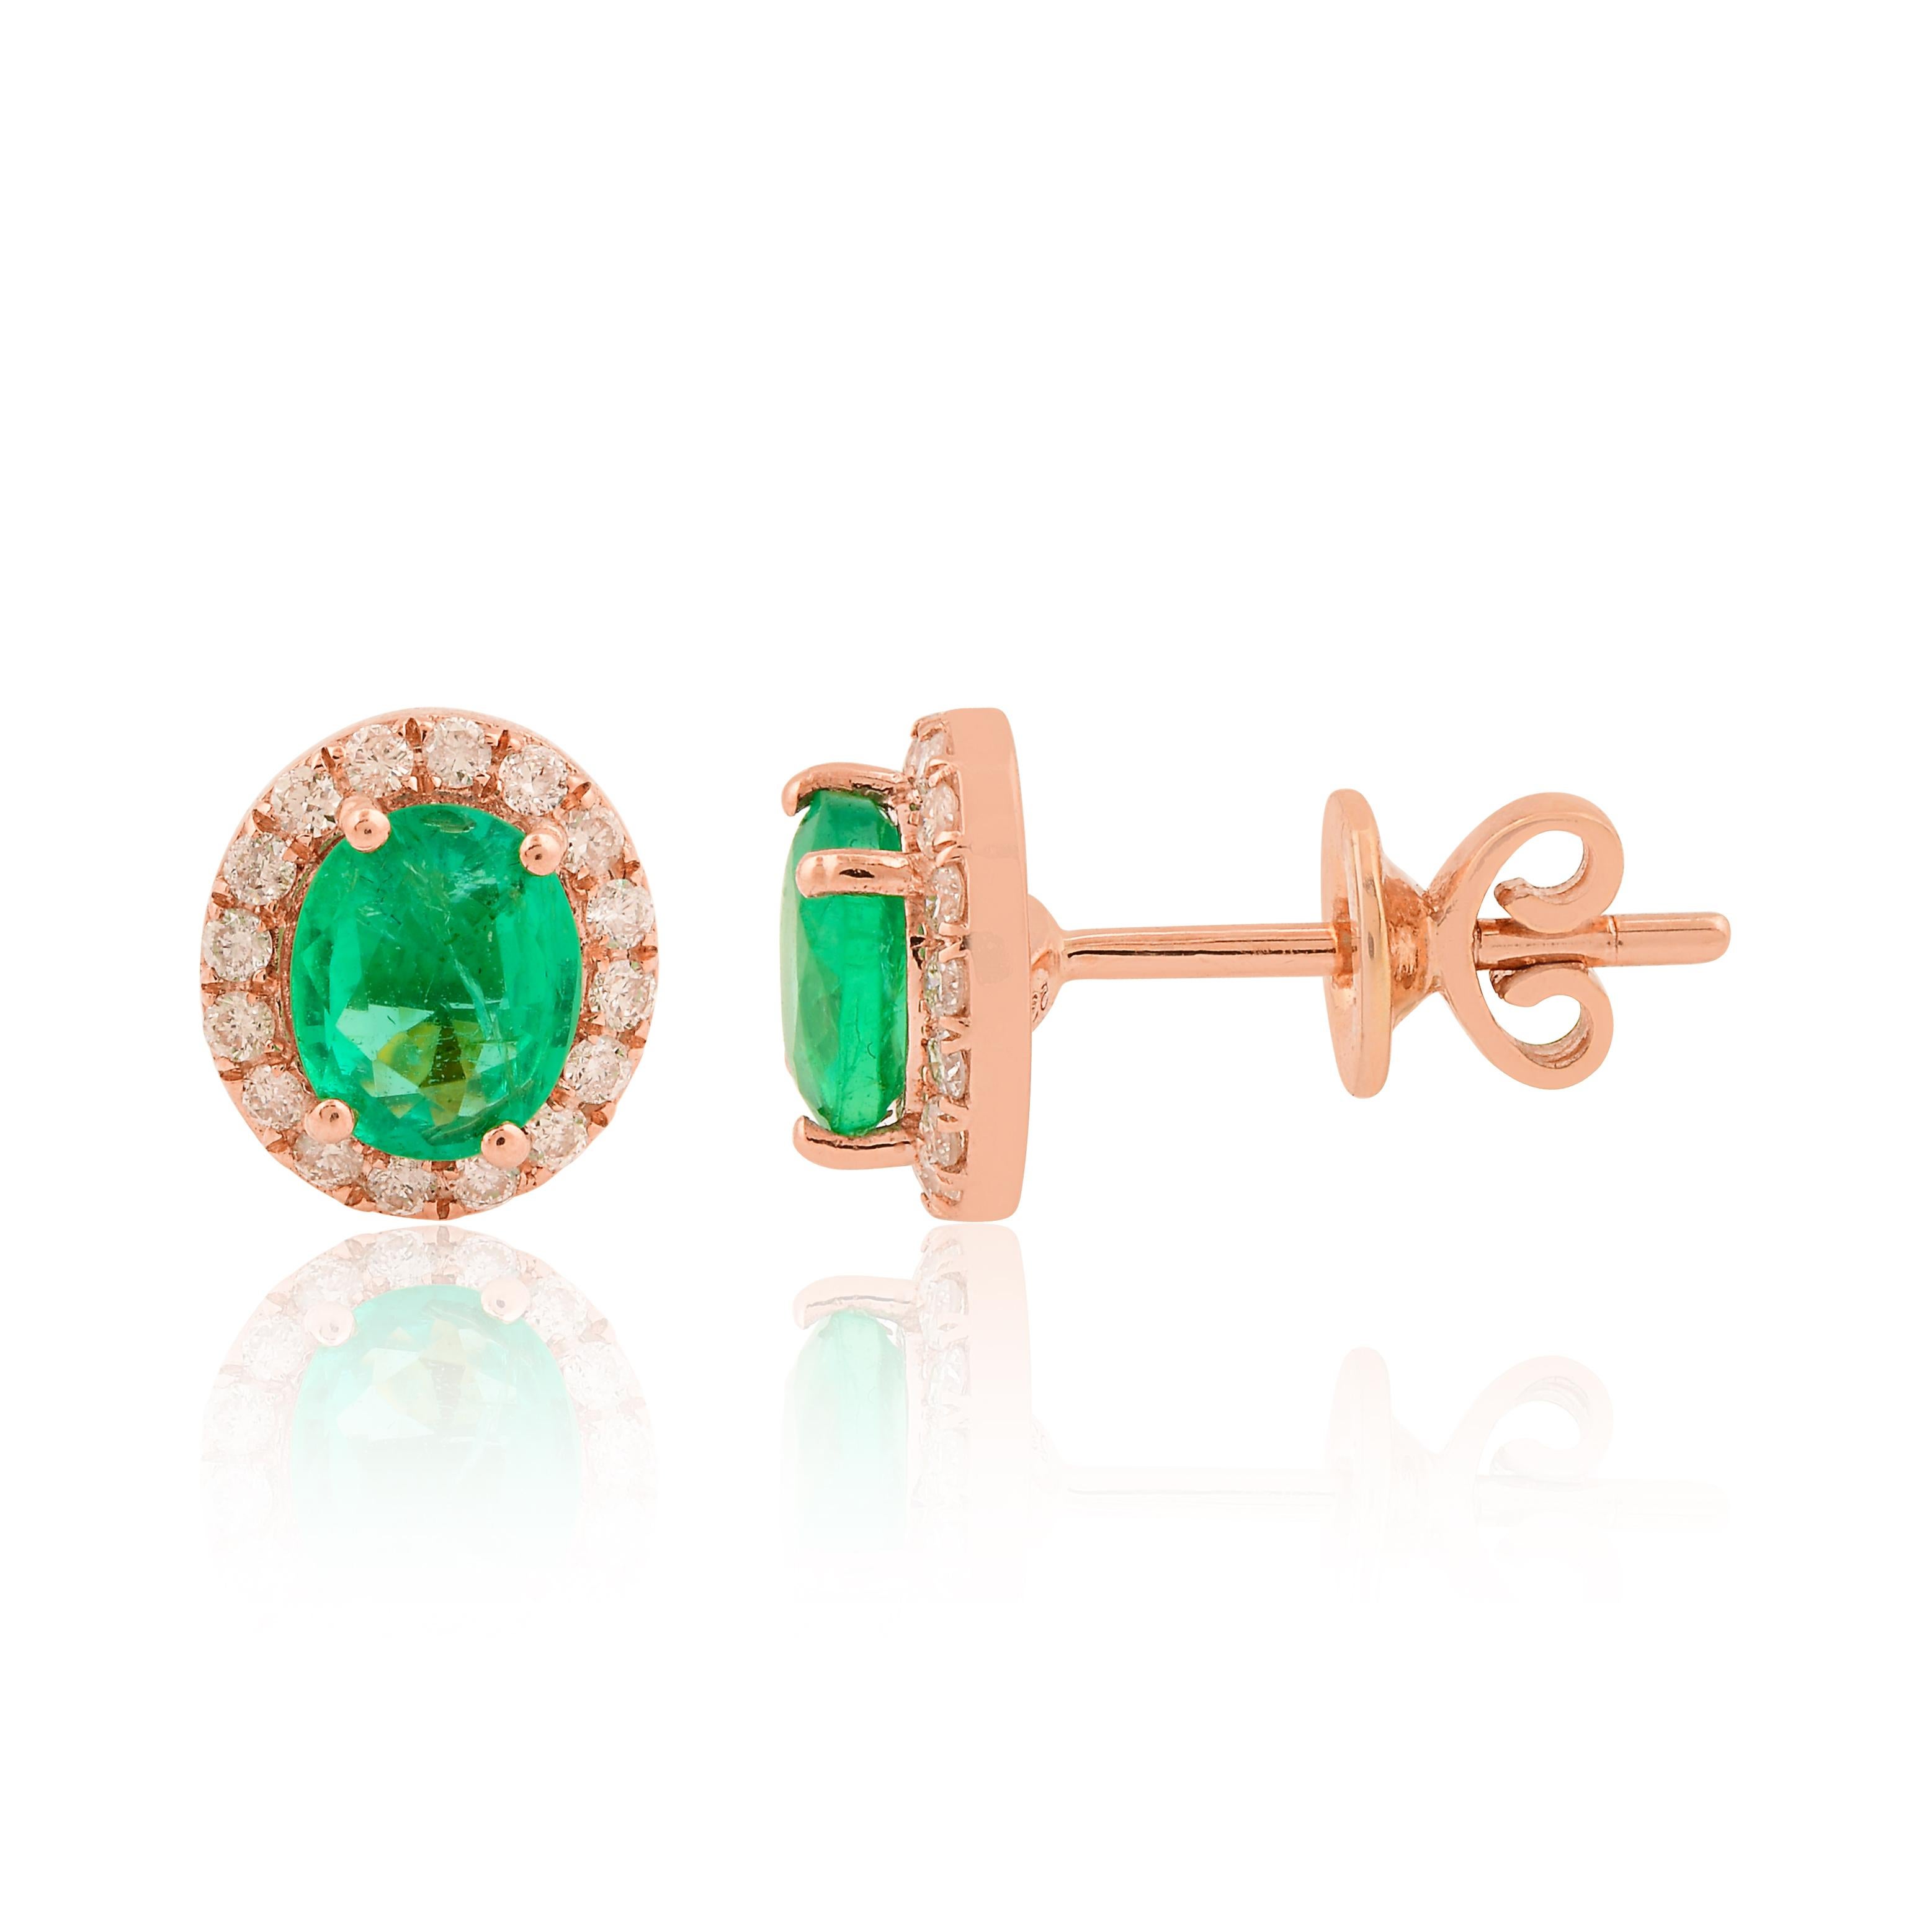 The focal point of each earring is the magnificent Zambian Emerald gemstone, renowned for its rich green hue and unparalleled natural beauty. Sourced from the verdant lands of Zambia, these emeralds boast a mesmerizing depth of color and exceptional